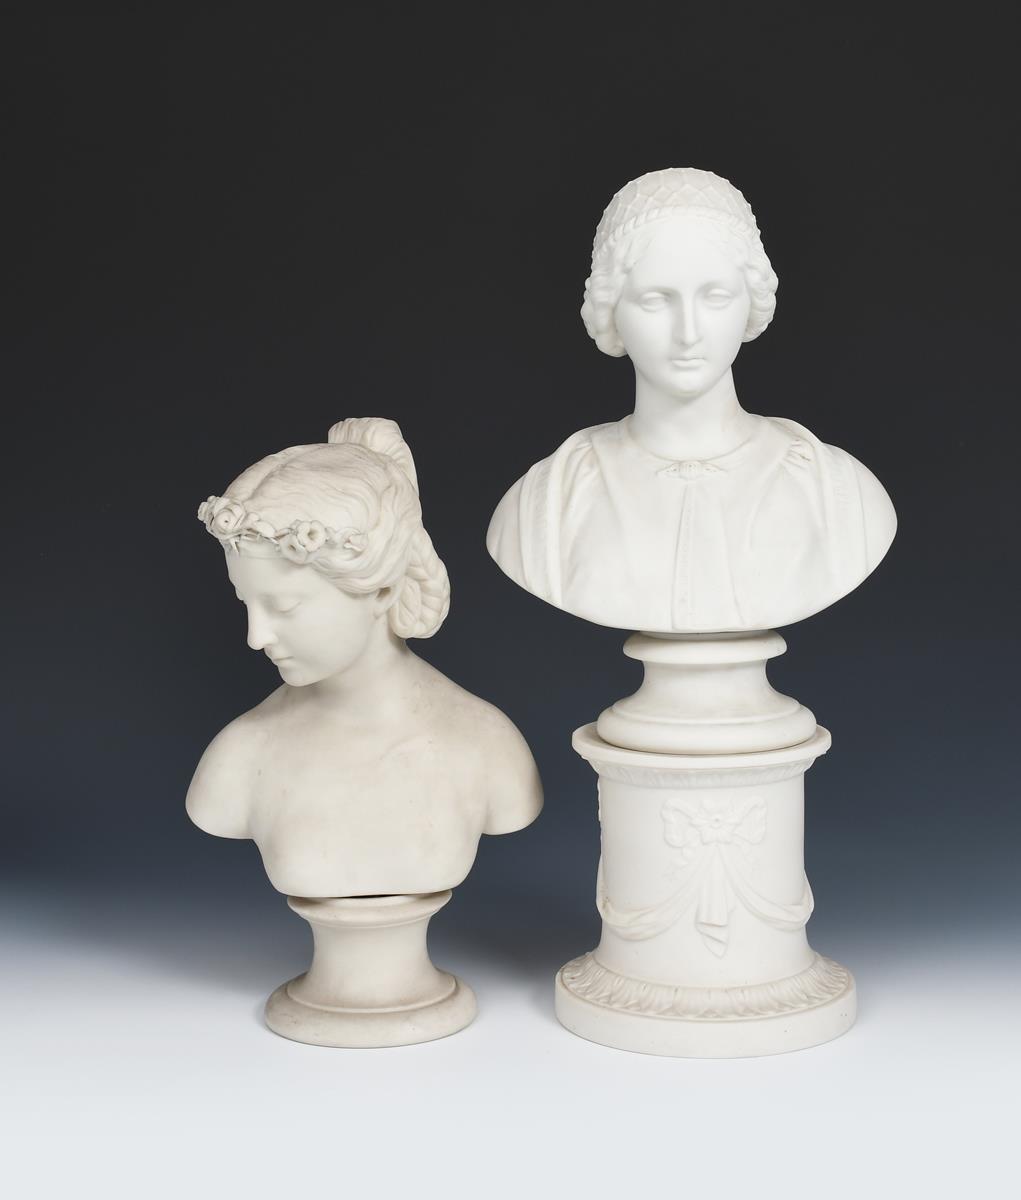 'Flora' a Copeland Parian Ware bust, on waisted socle, and another Parian Ware bust of a woman on